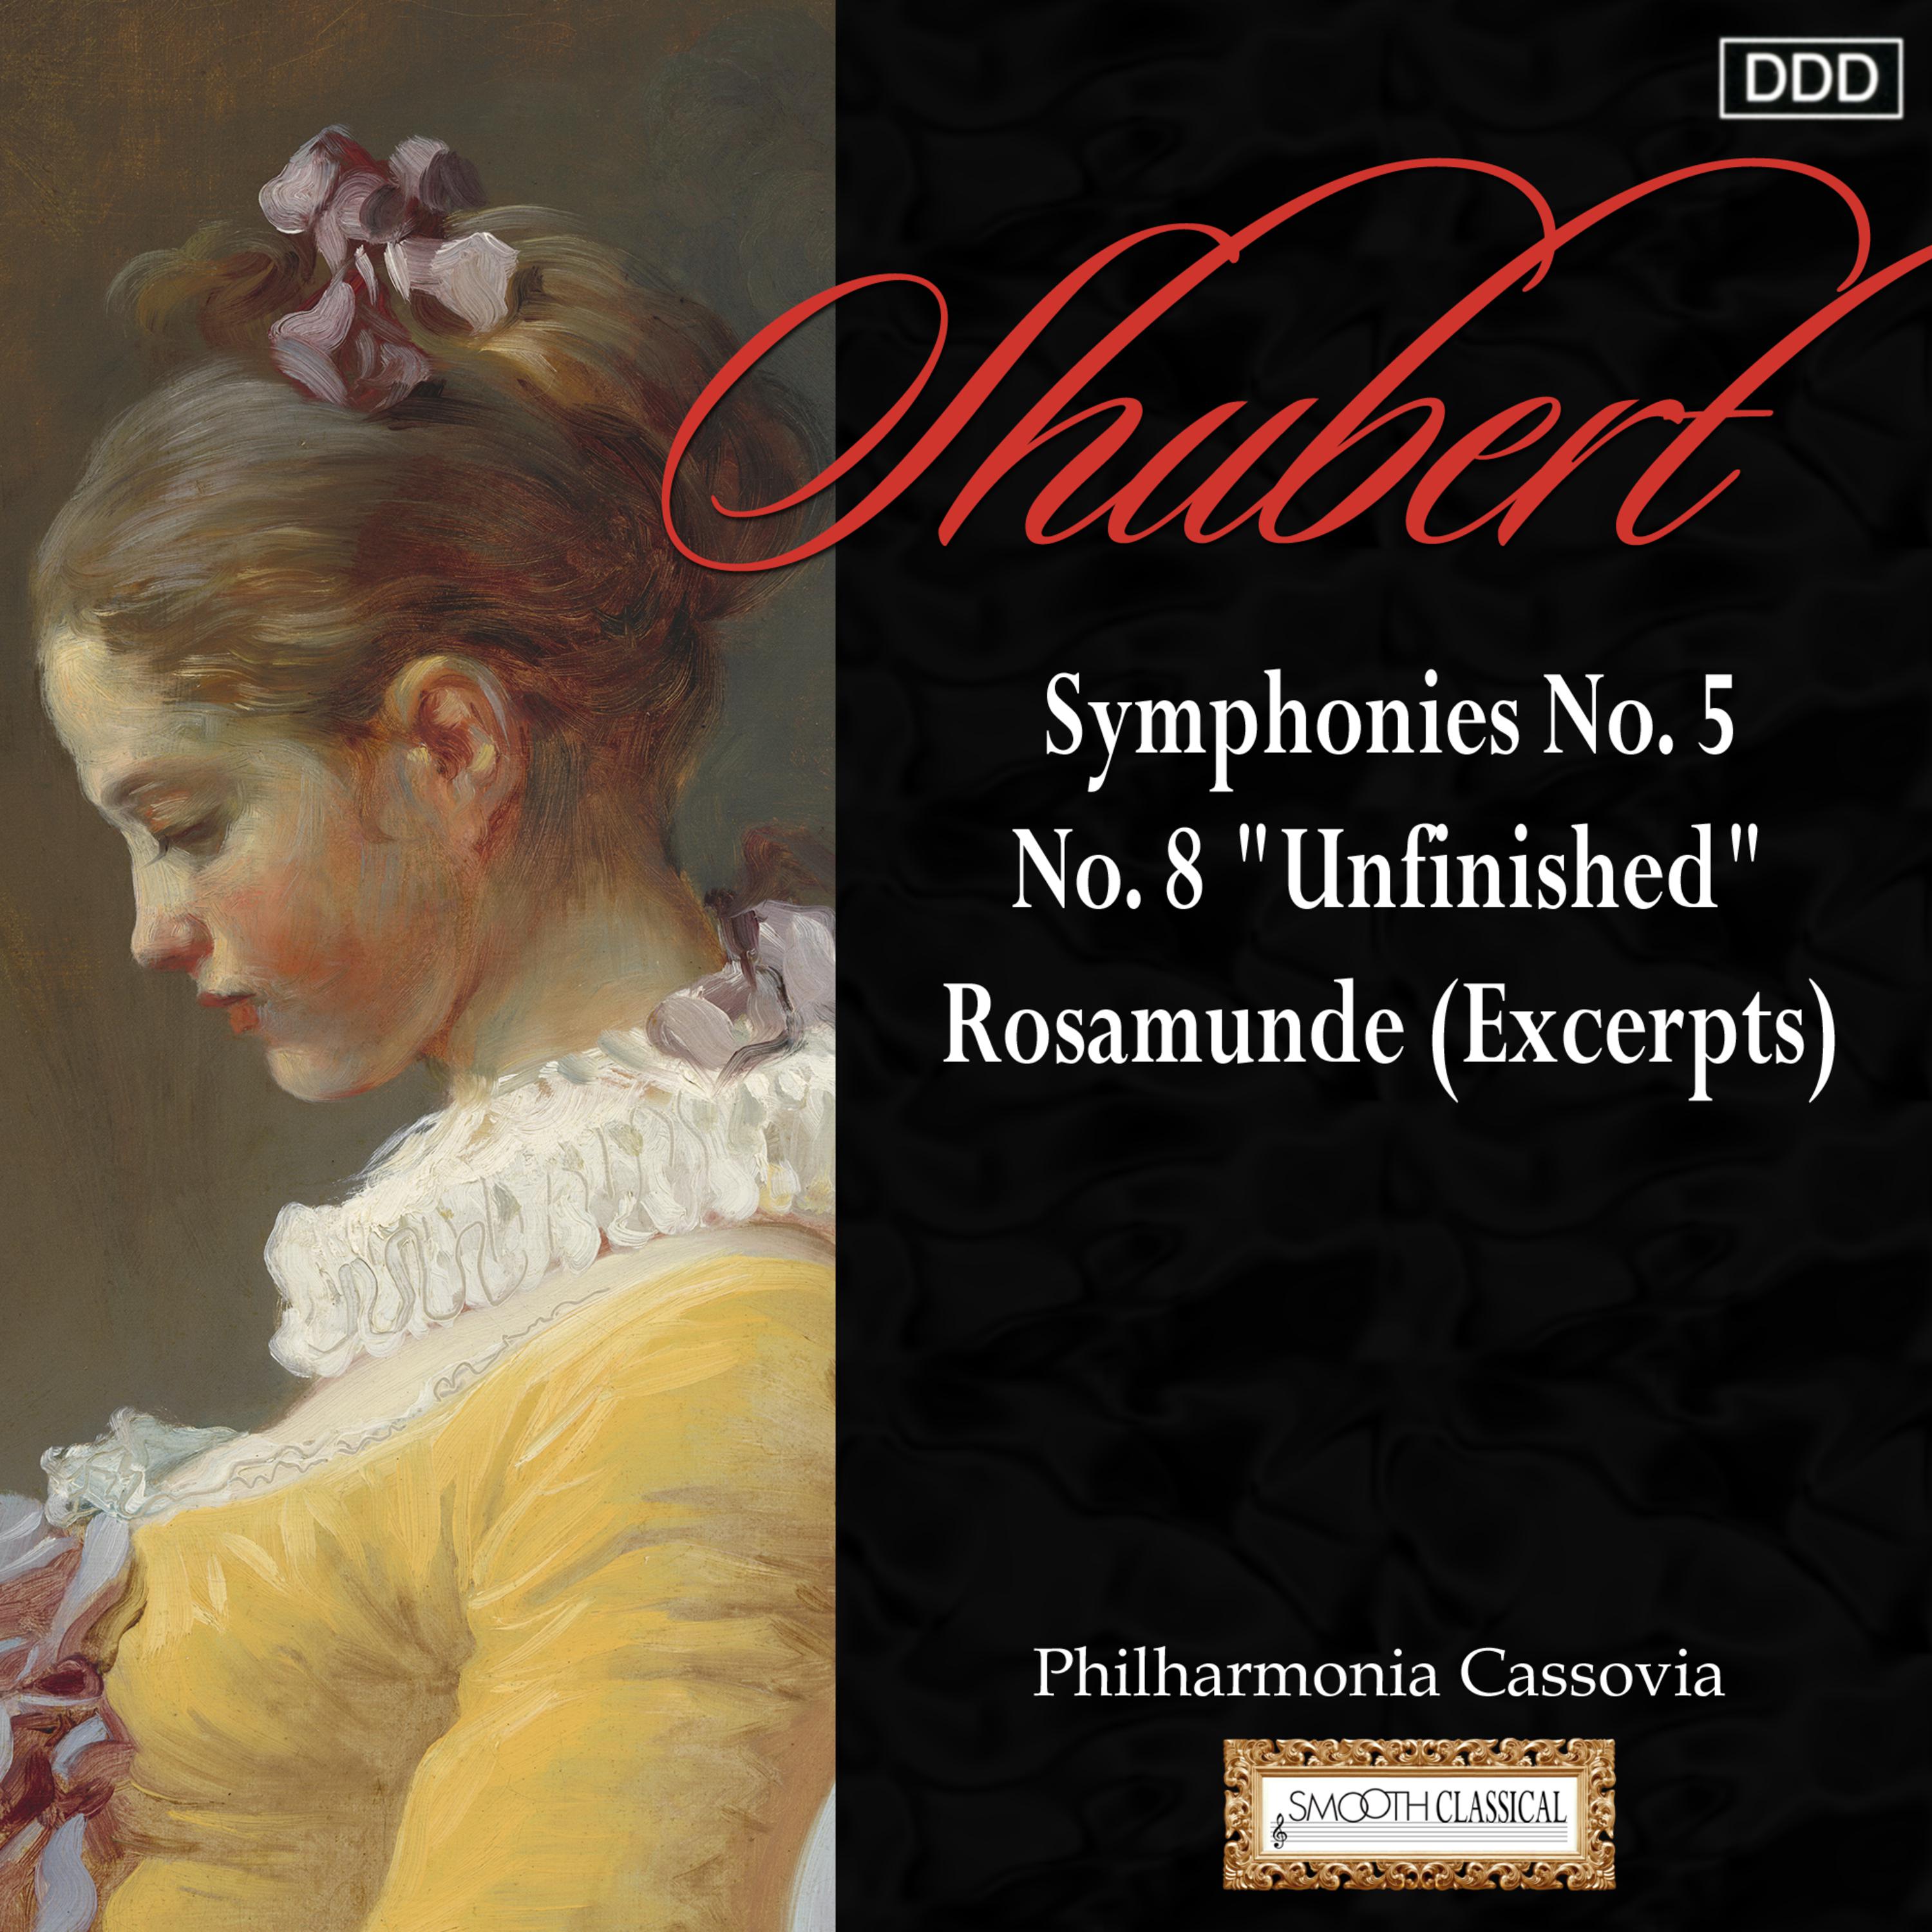 Schubert: Symphonies Nos. 5 and 8, "Unfinished" - Rosamunde (Excerpts)